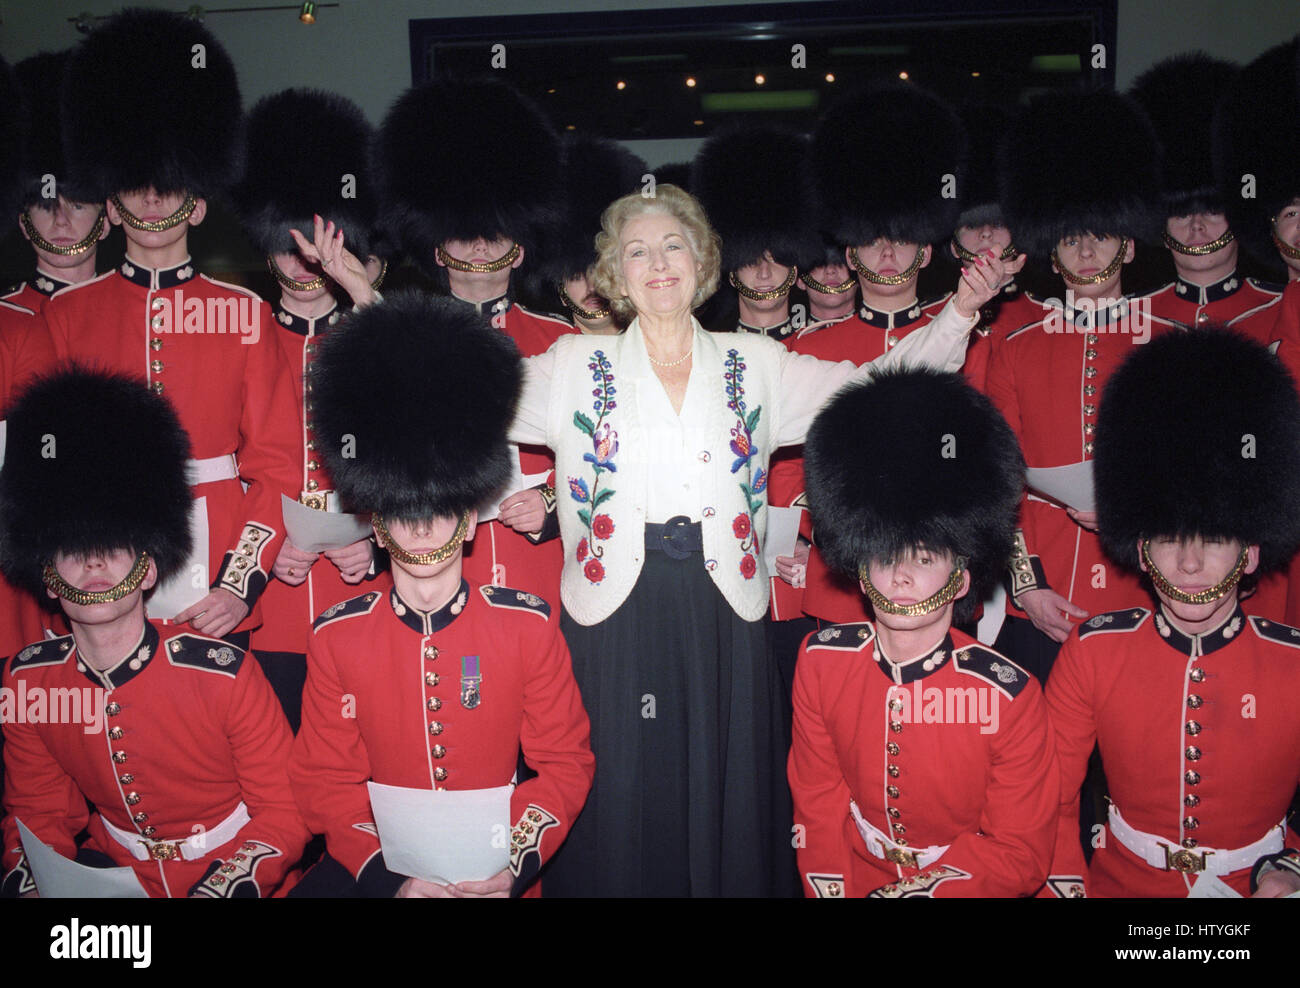 Dame Vera Lynn singing with the troops at a London recording studio, where she recorded new versions of the wartime favourite 'We'll Meet Again' and 'White Cliffs of Dover' with members of the 2nd Battalion Grenadier Guards as a backing choir. Stock Photo